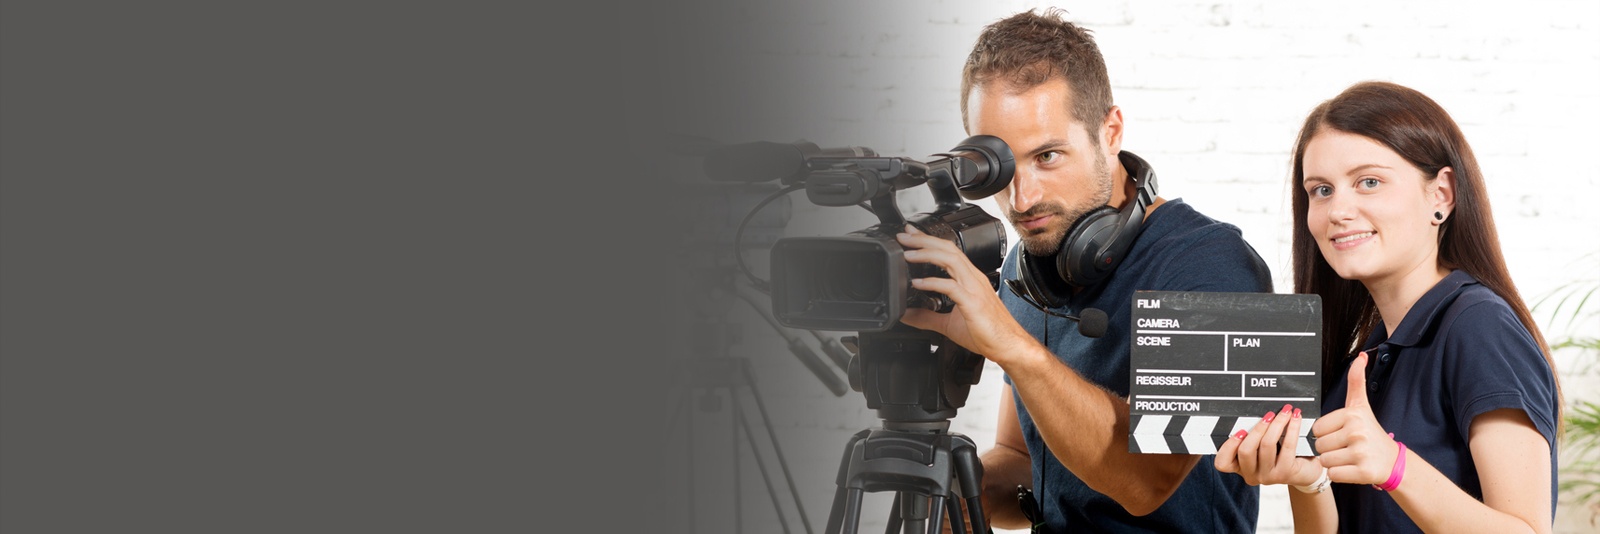 Corporate Video Production & Video Marketing for Businesses in Tulsa, Oklahoma